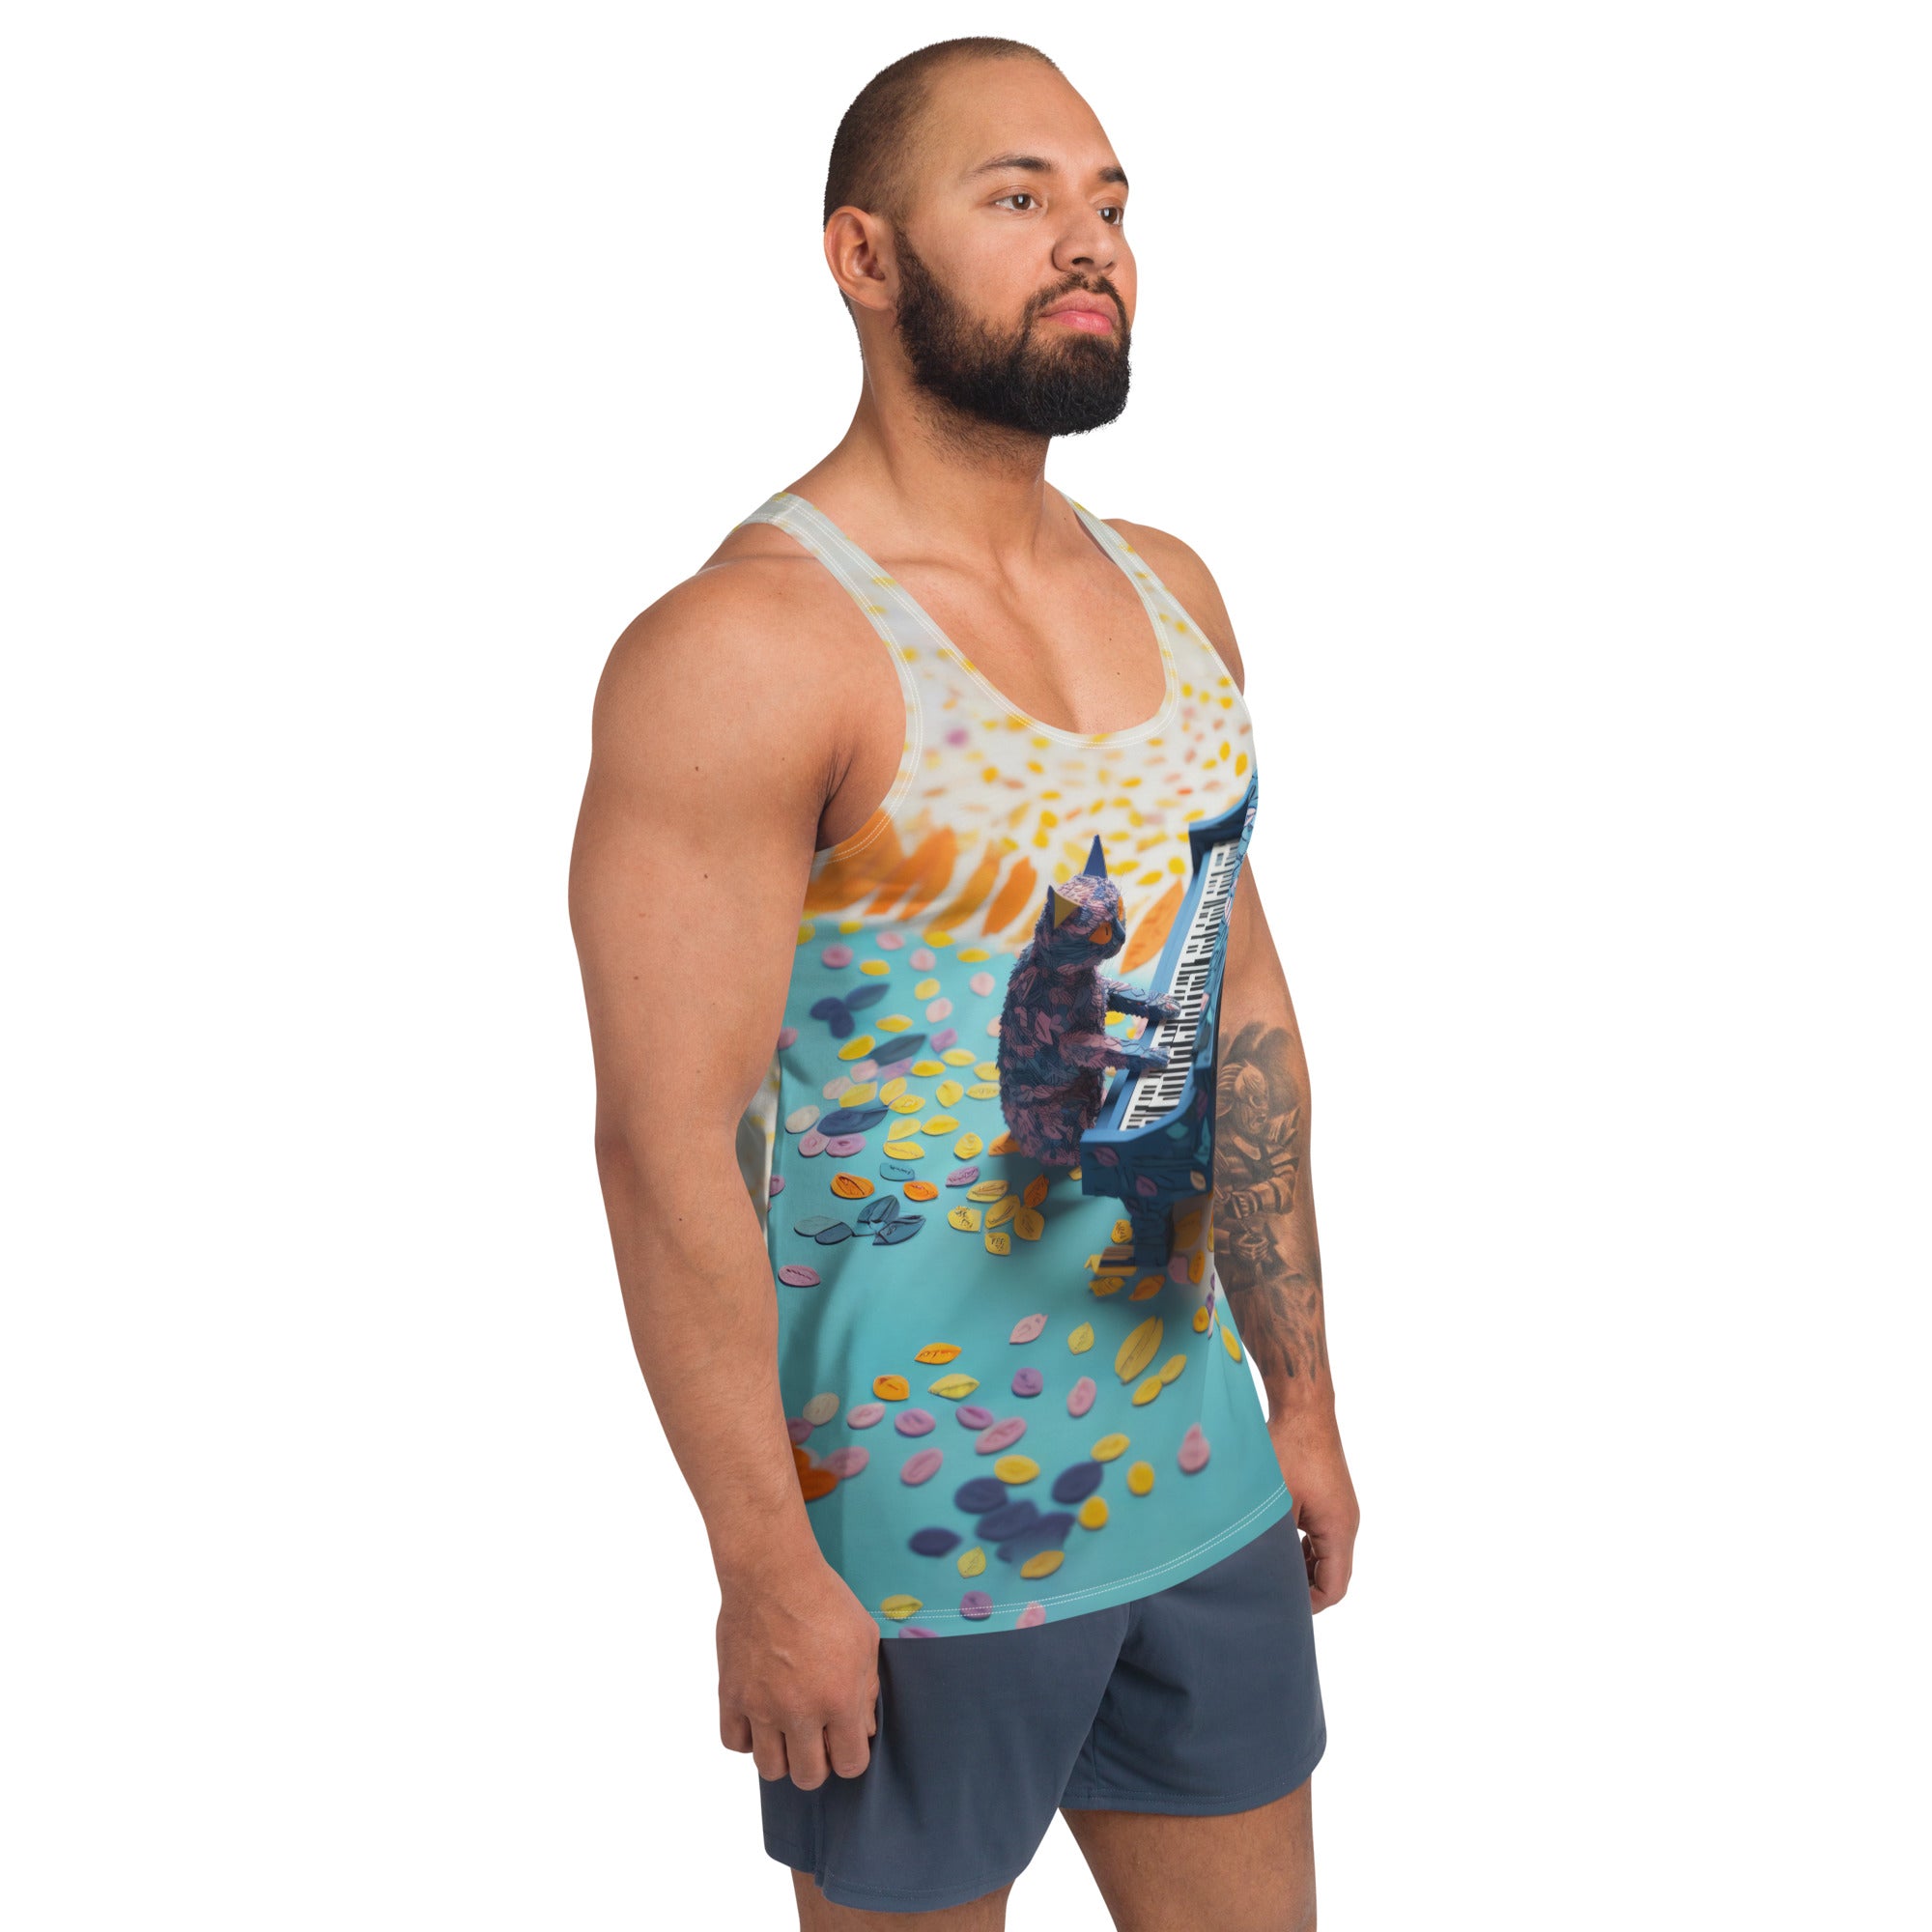 Men's tank top with modern origami eagle design.